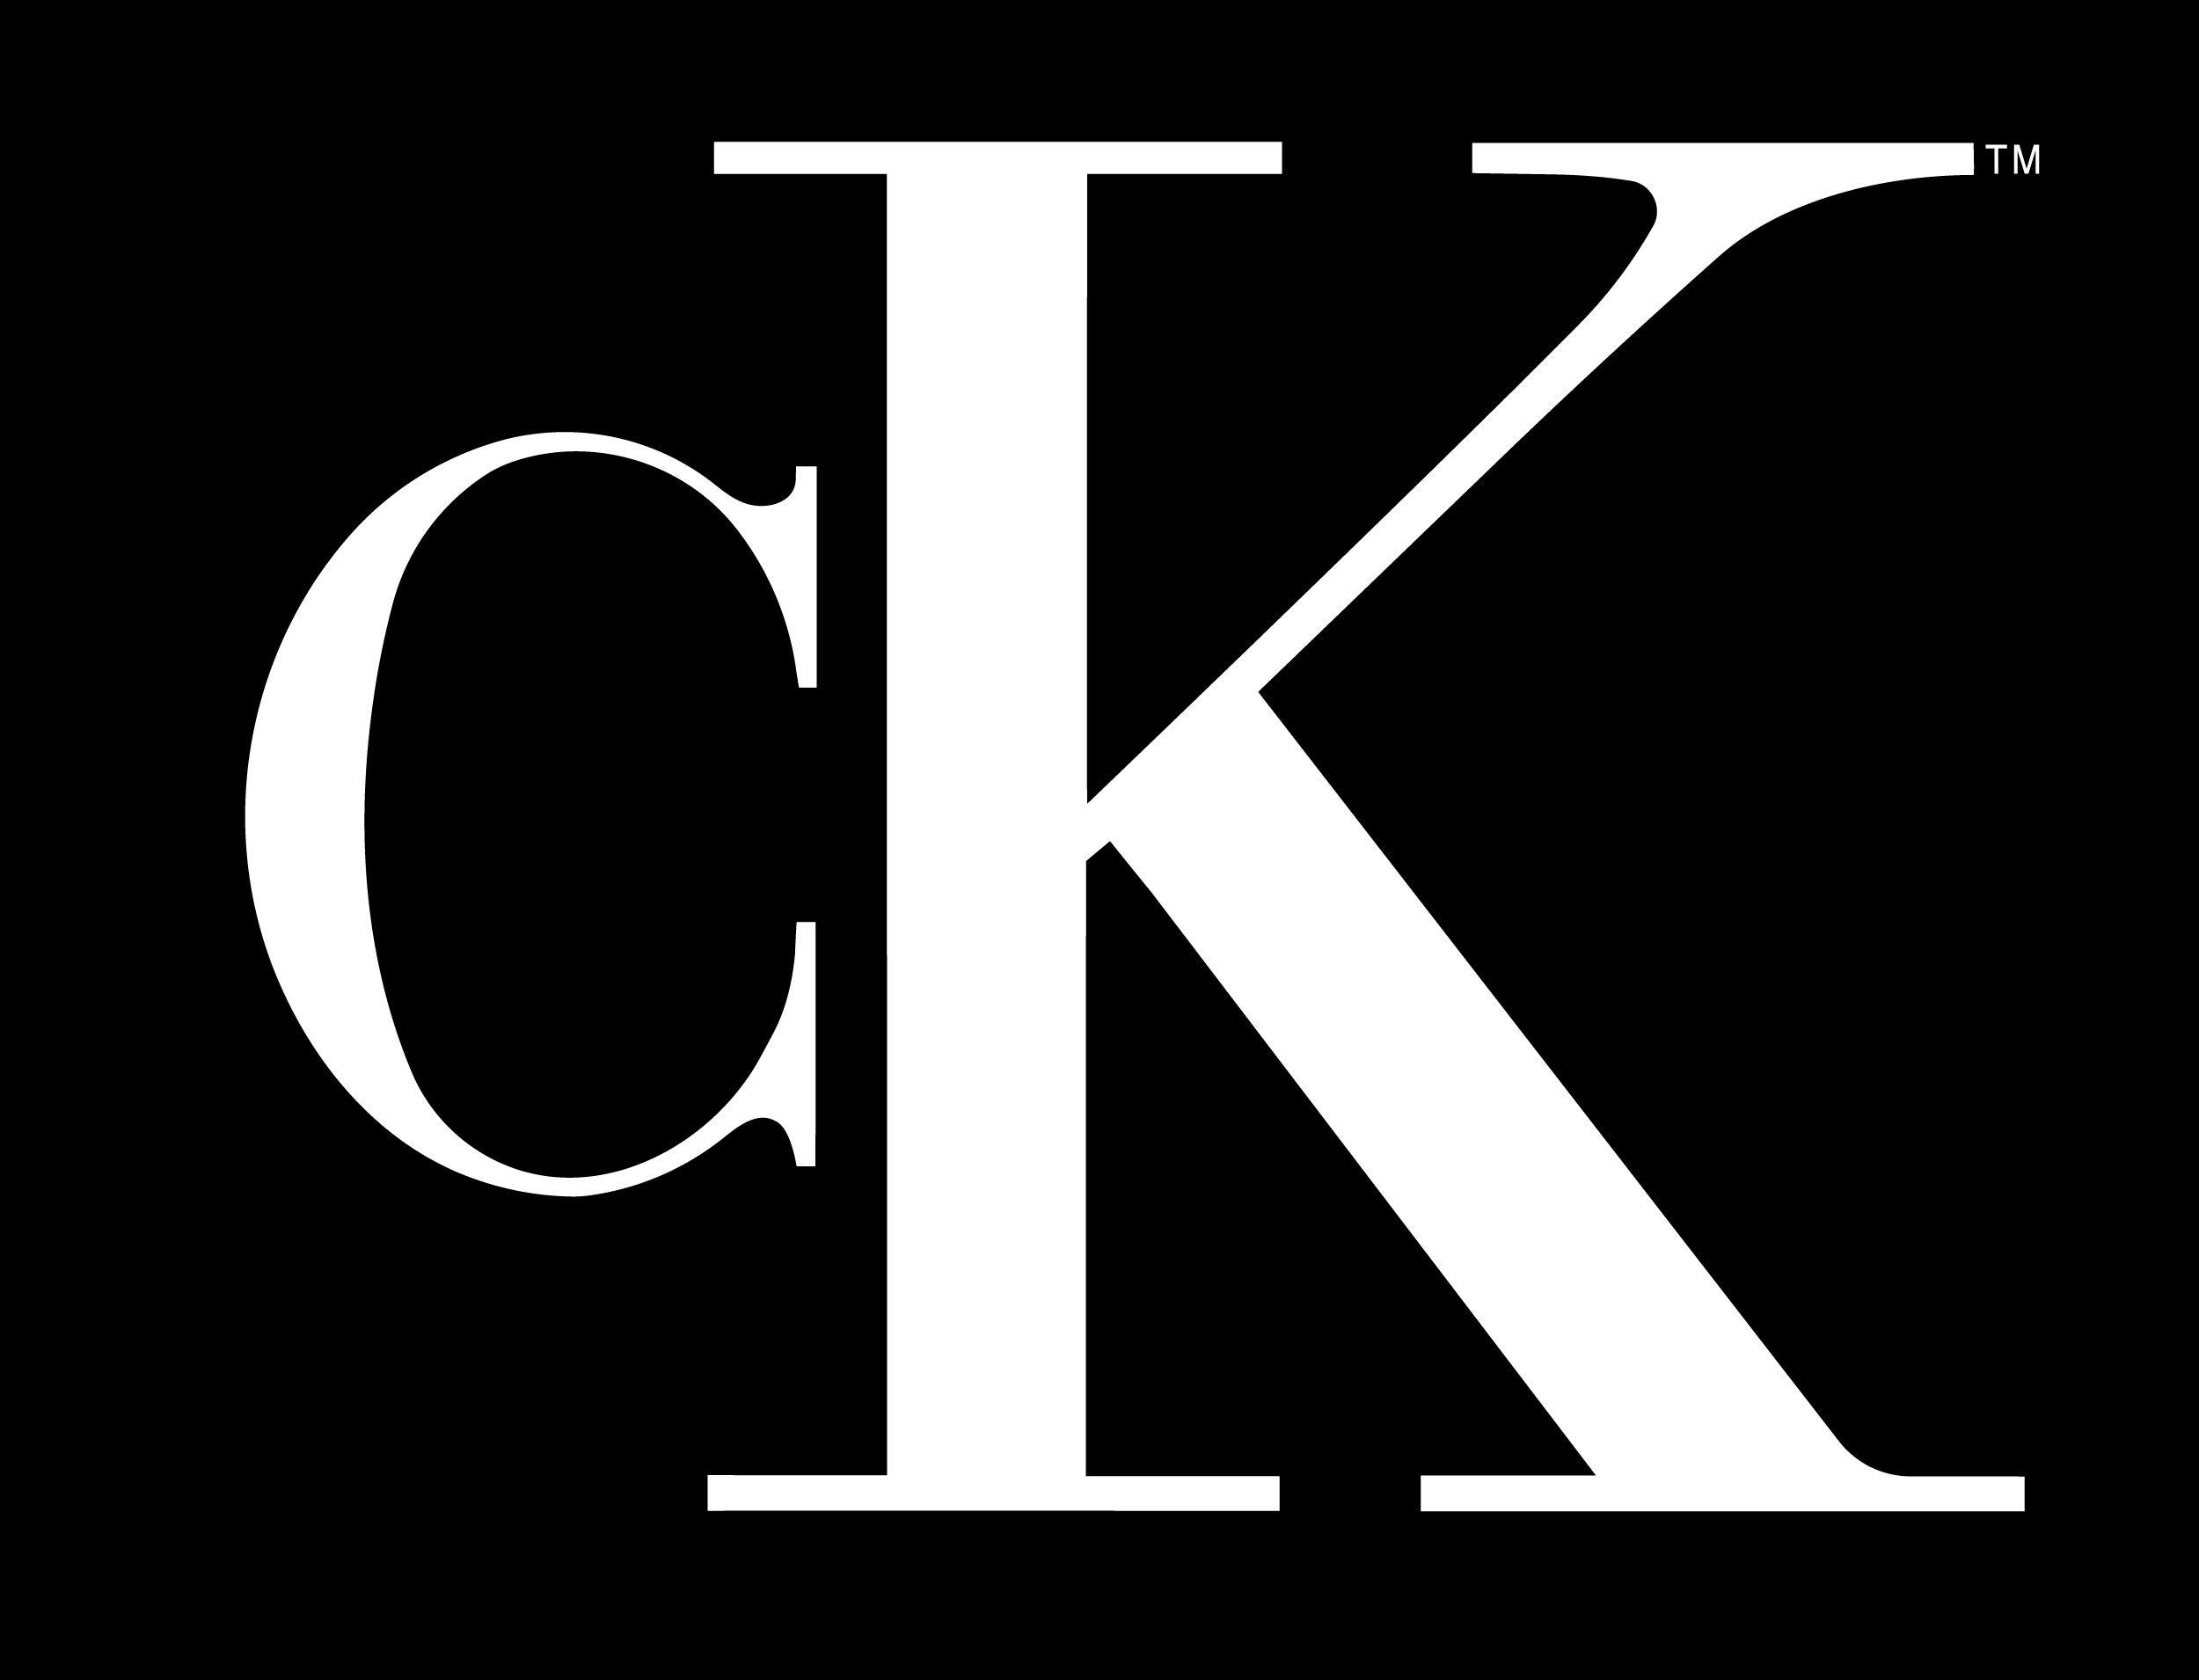 Calvin Klein Logo - Calvin Klein Logo, Calvin Klein Symbol Meaning, History and Evolution